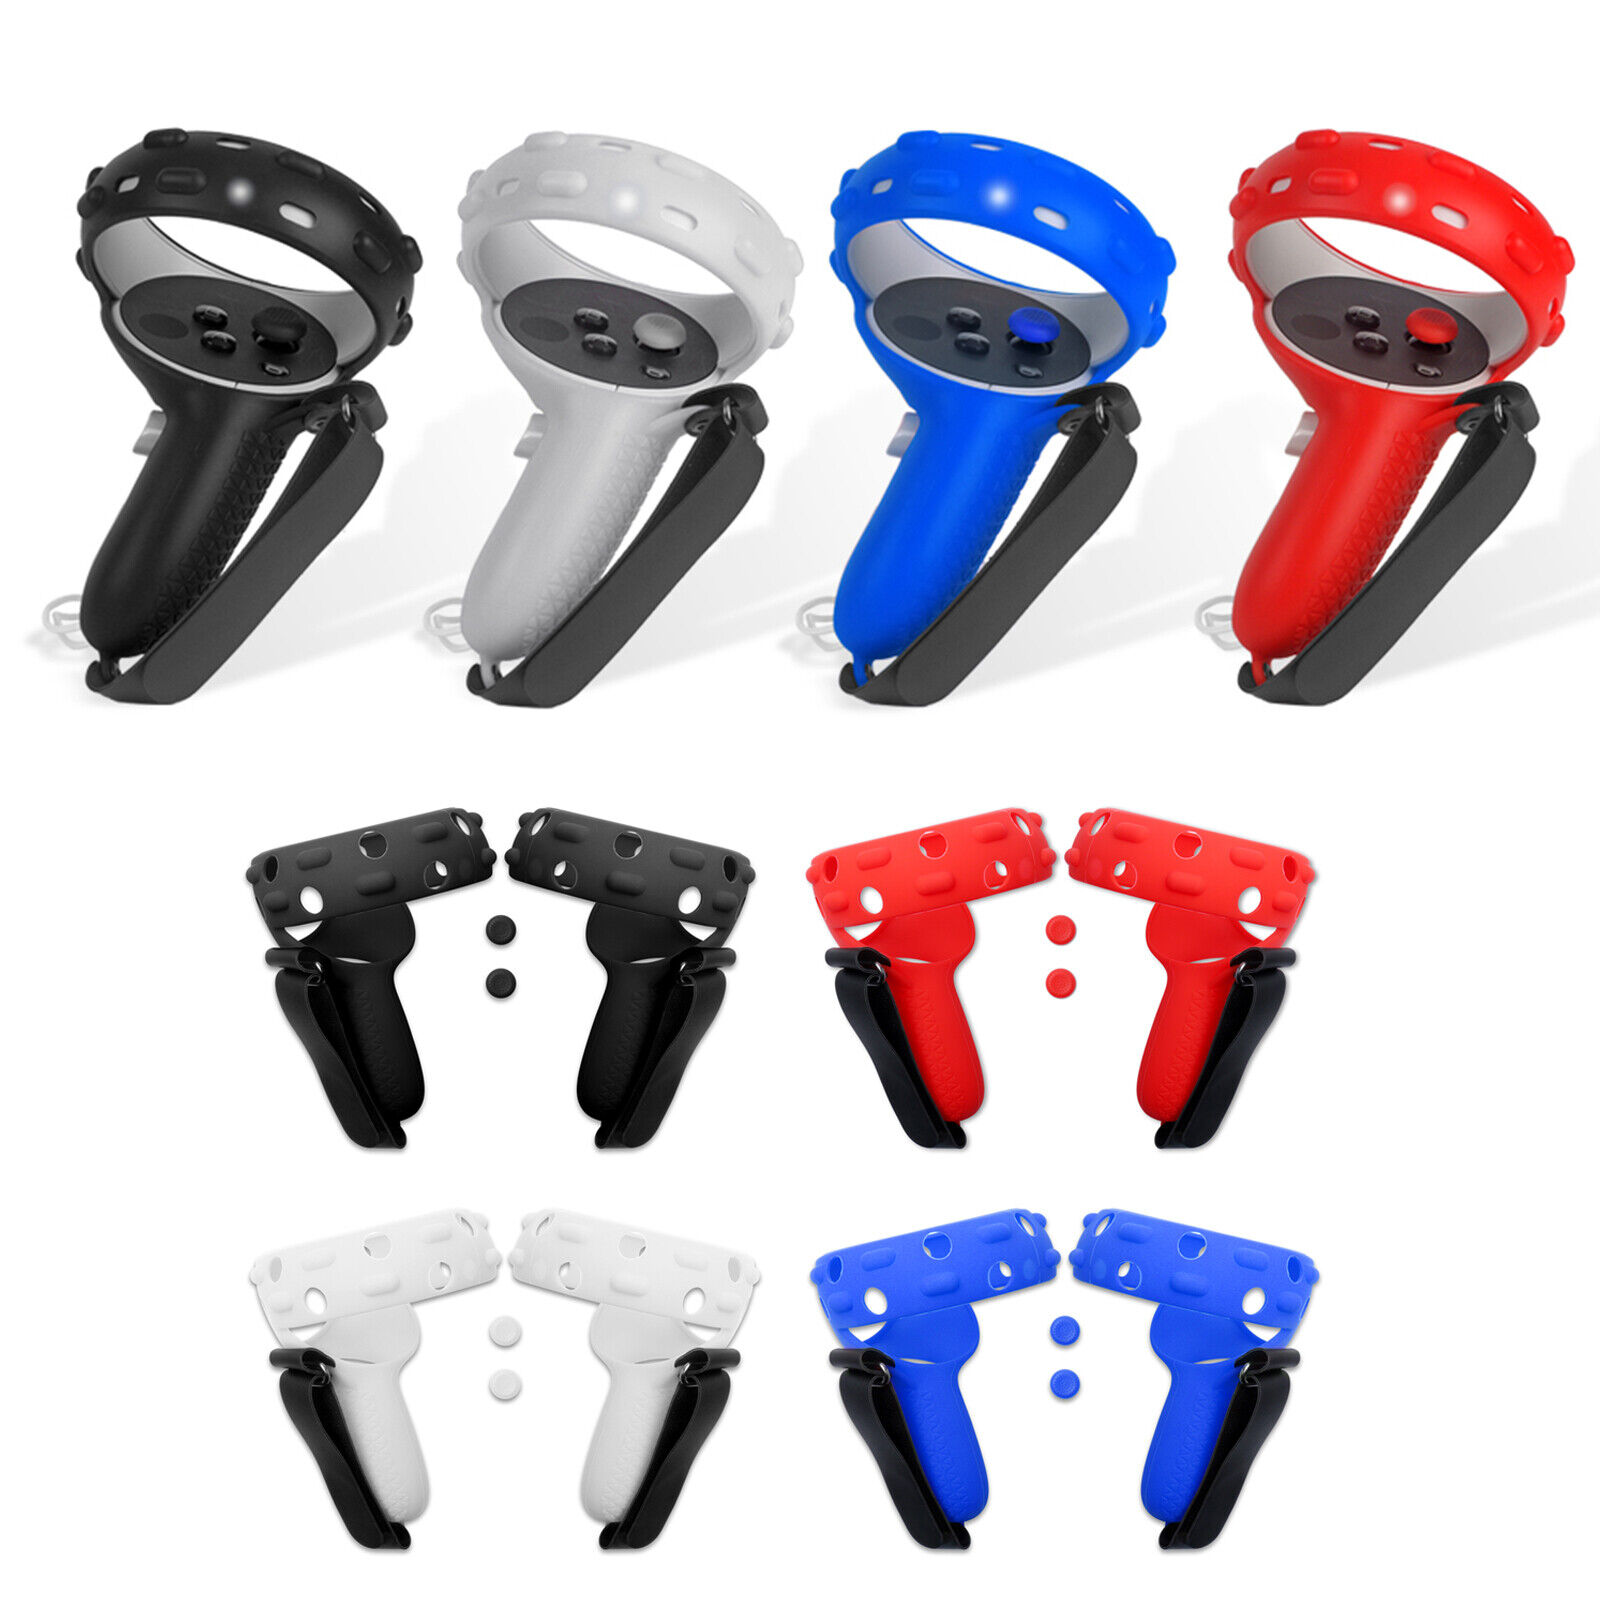 Silicone Jacksonville Mall Handle Grip Cover Max 49% OFF Controller Sleeve Hand for Strap Oc +